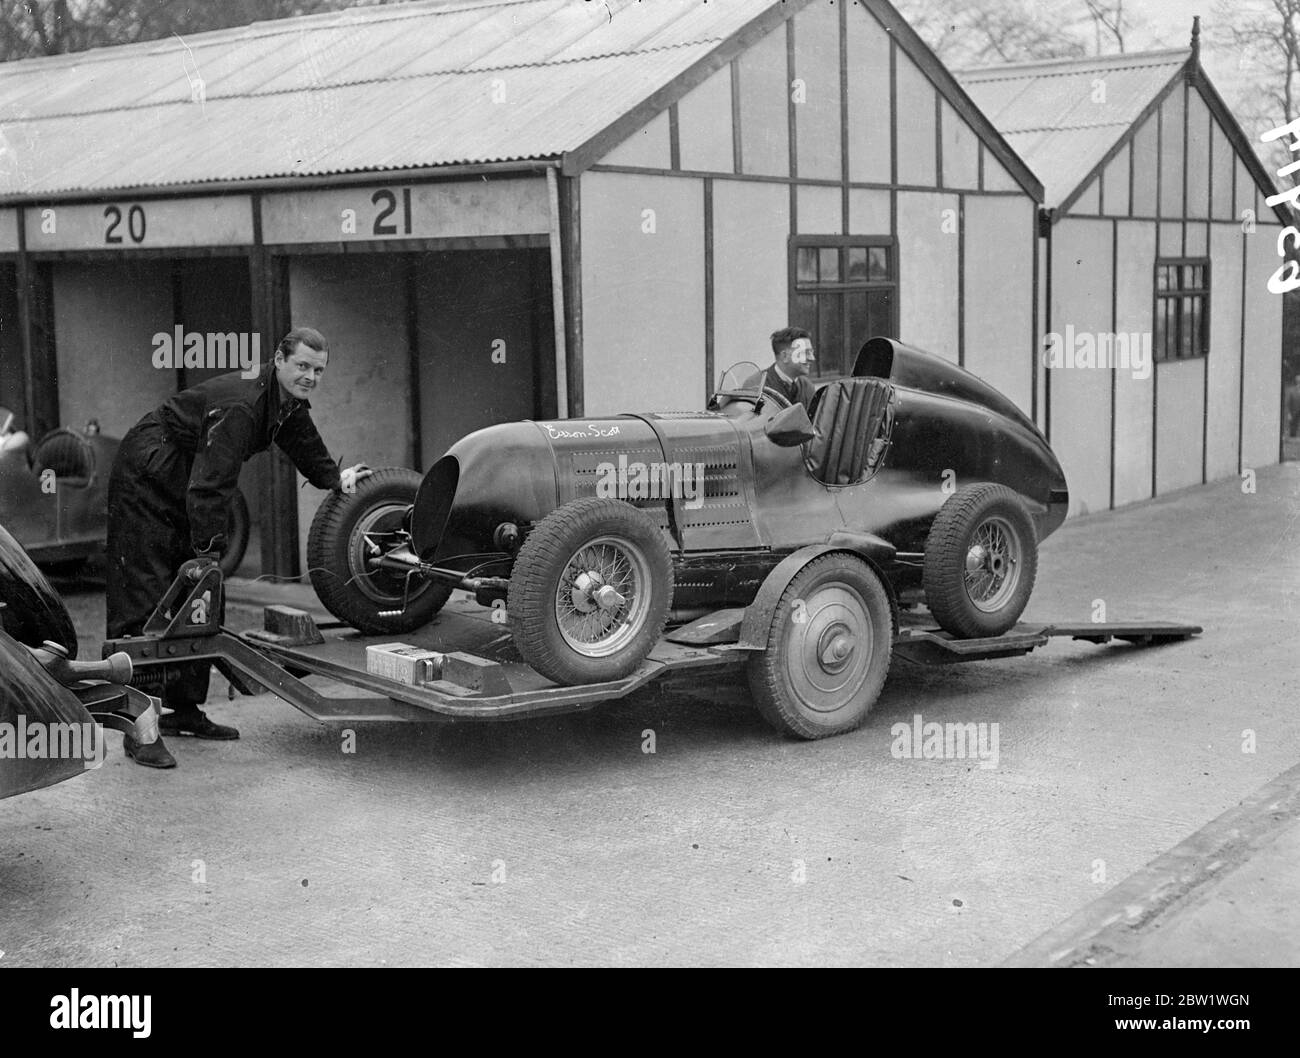 New Crystal Palace road racing track opened. The new road racing track at the Crystal Palace site was opened by Earl Howe, the racing driver. First race on the circuit will be the Coronation Trophy event. Photo shows, A Esson Scott unloading his Scott Bugatti car at the pits. Esses Scott is on left 22 April 1937 Stock Photo